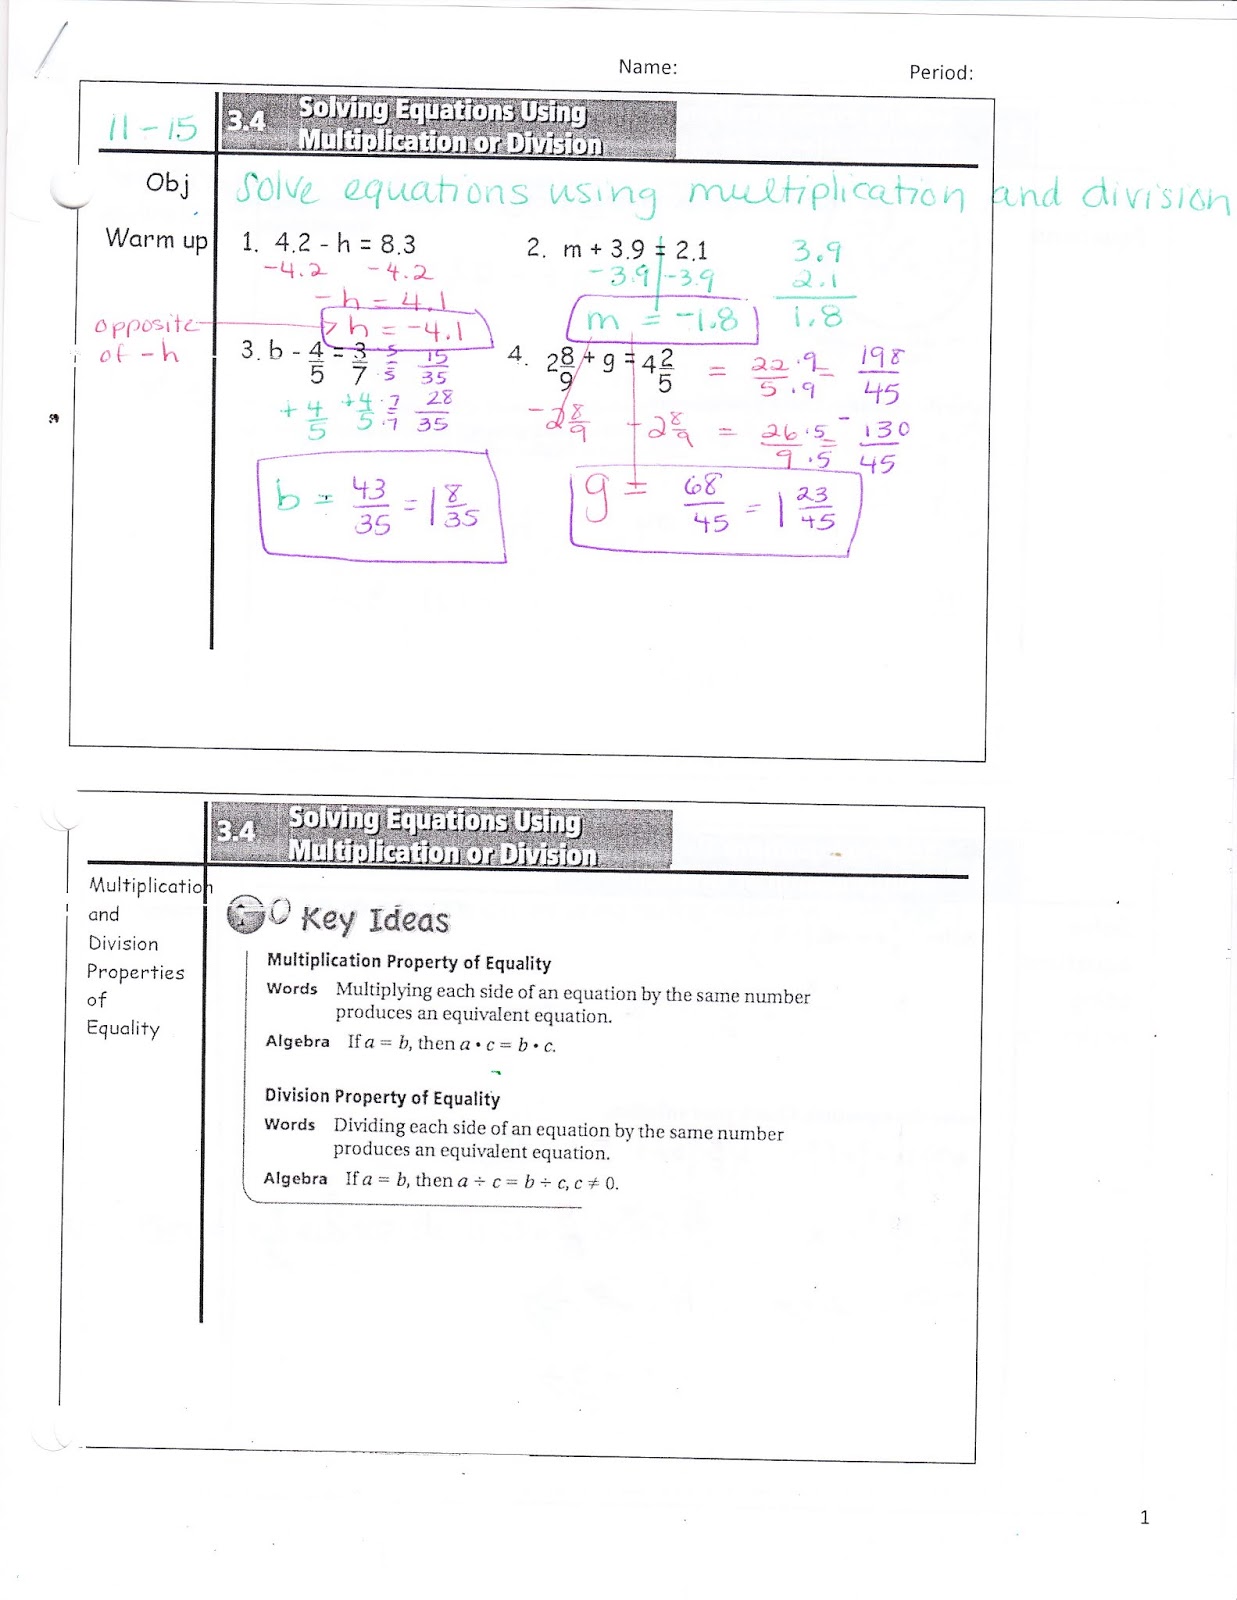 ms-jean-s-classroom-blog-3-4-solving-equations-by-multiplying-and